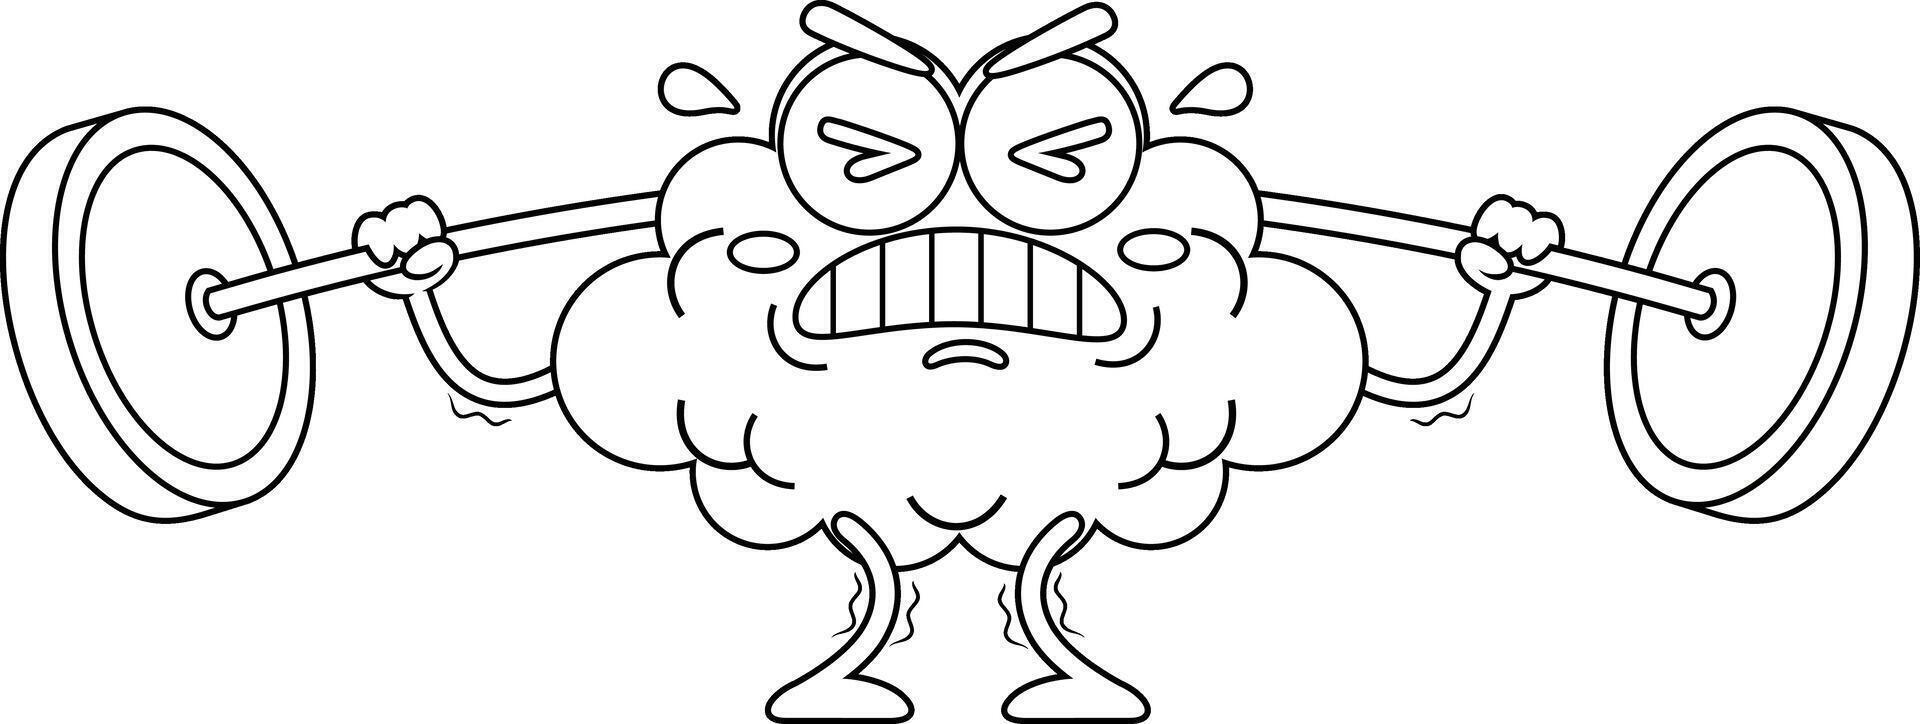 Outlined Funny Brain Cartoon Character Lifting Weights vector